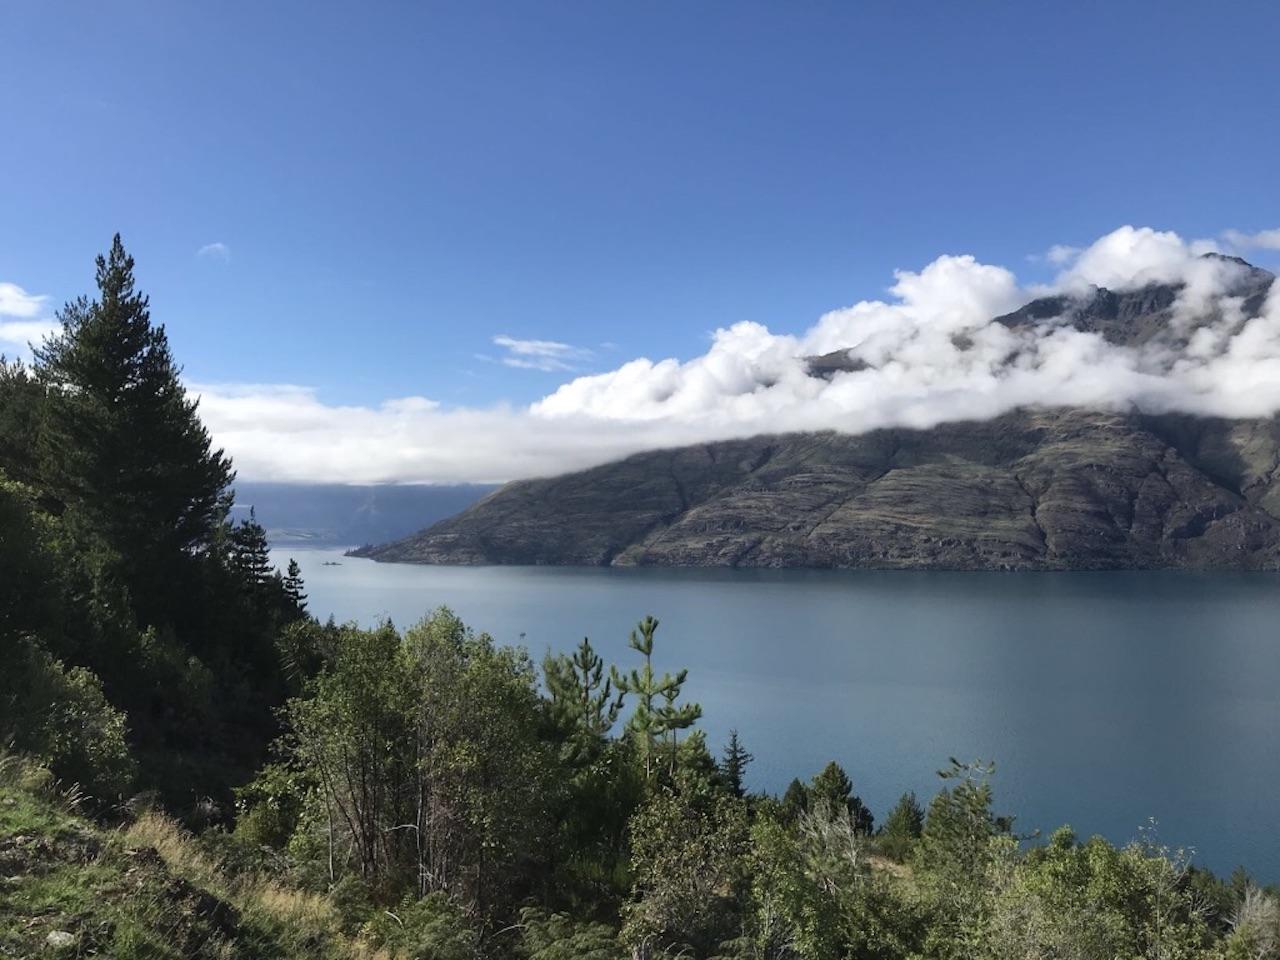 Queenstown lake location, vacant land for photoshoots and film